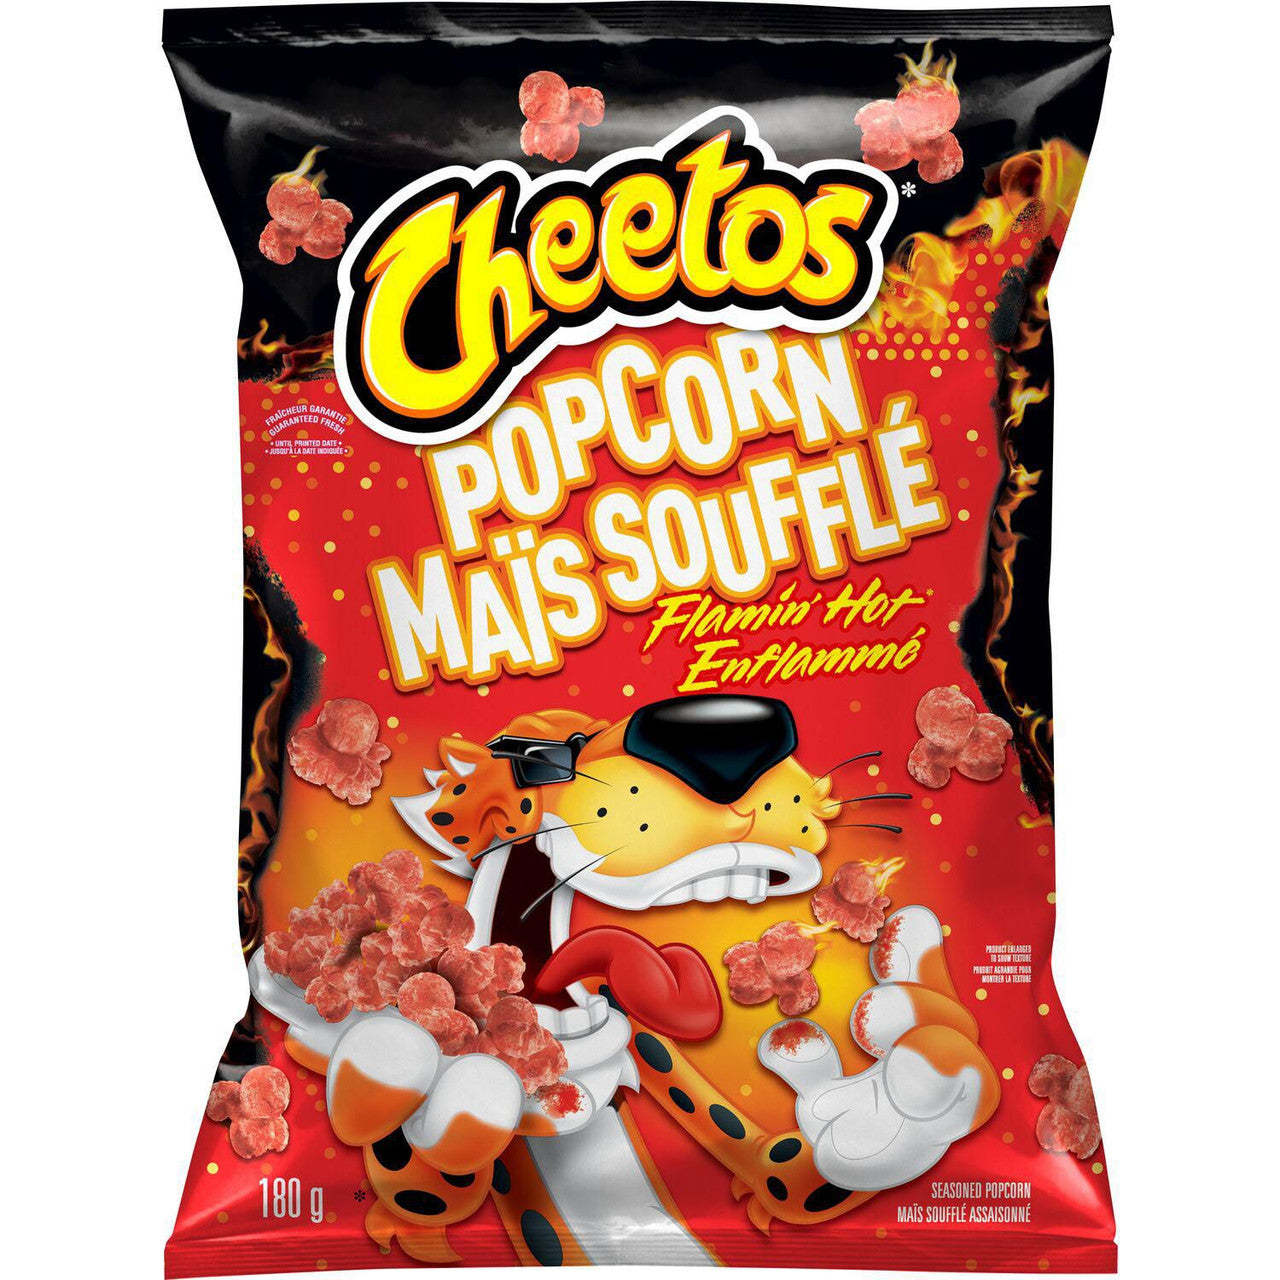 Cheetos Crunchy Cheese Flavored Snacks, 1 Ounce (Pack of 40) 40ct Crunchy 